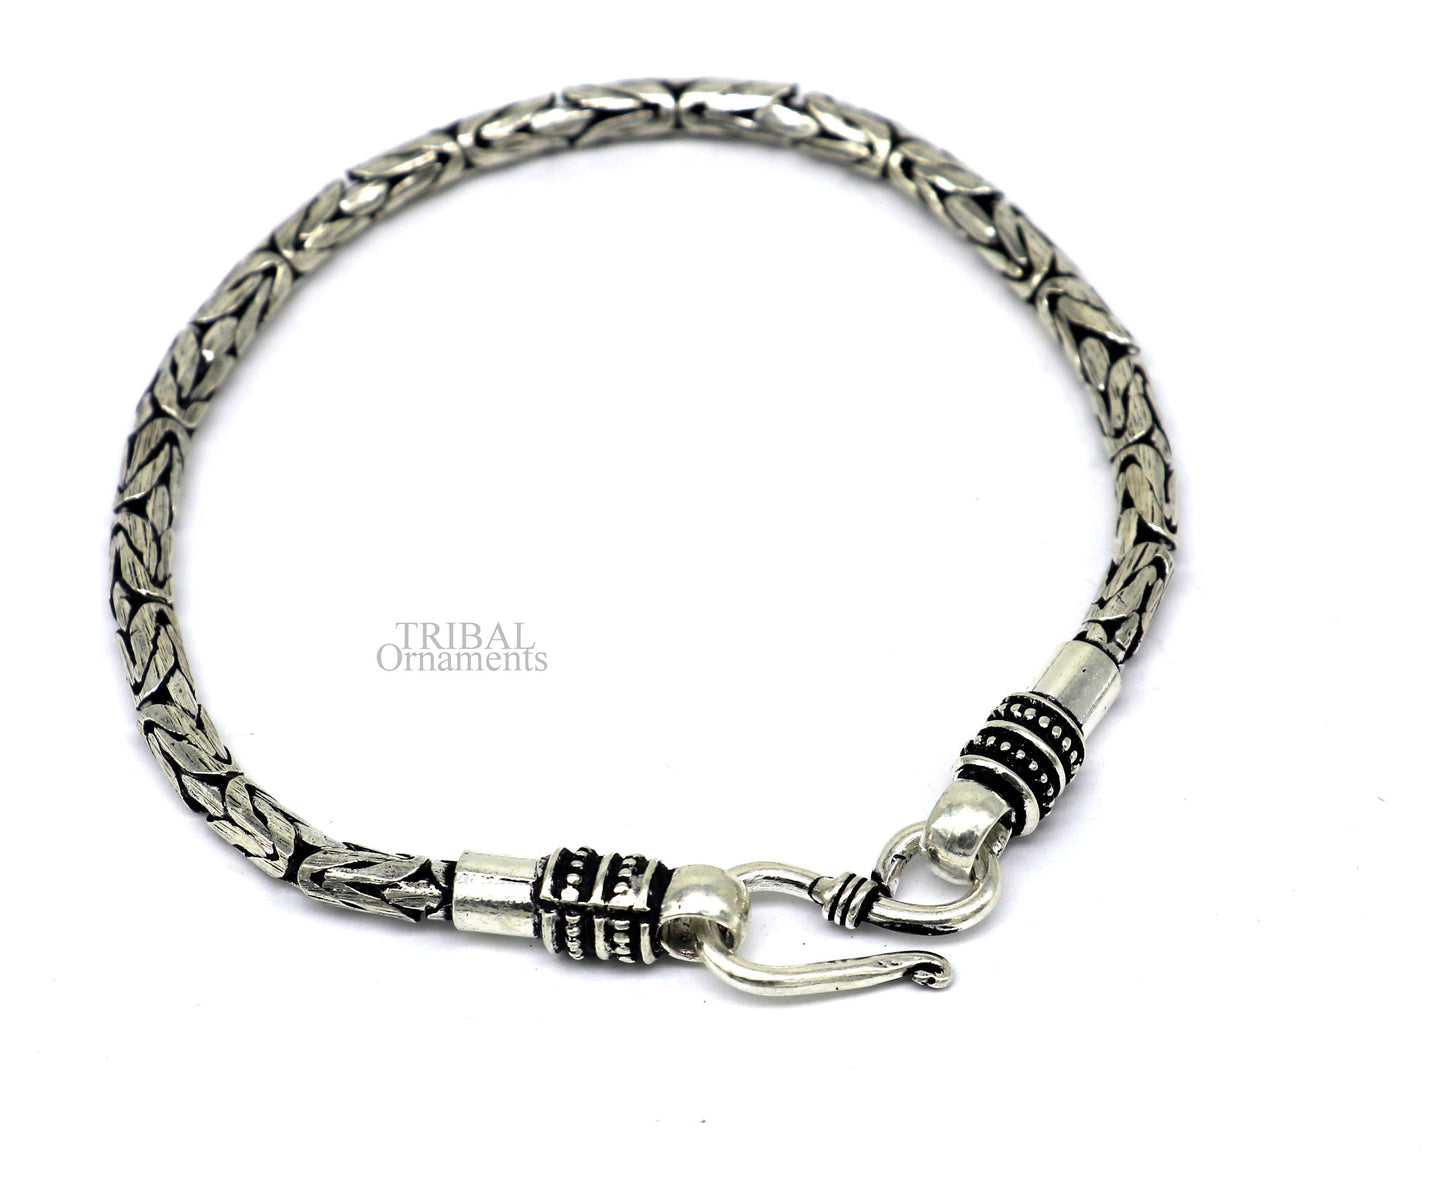 All size 4MM vintage style handmade solid 925 sterling silver bracelet unisex gifting tribal stylish jewelry for men's and women's Rsbr370 - TRIBAL ORNAMENTS